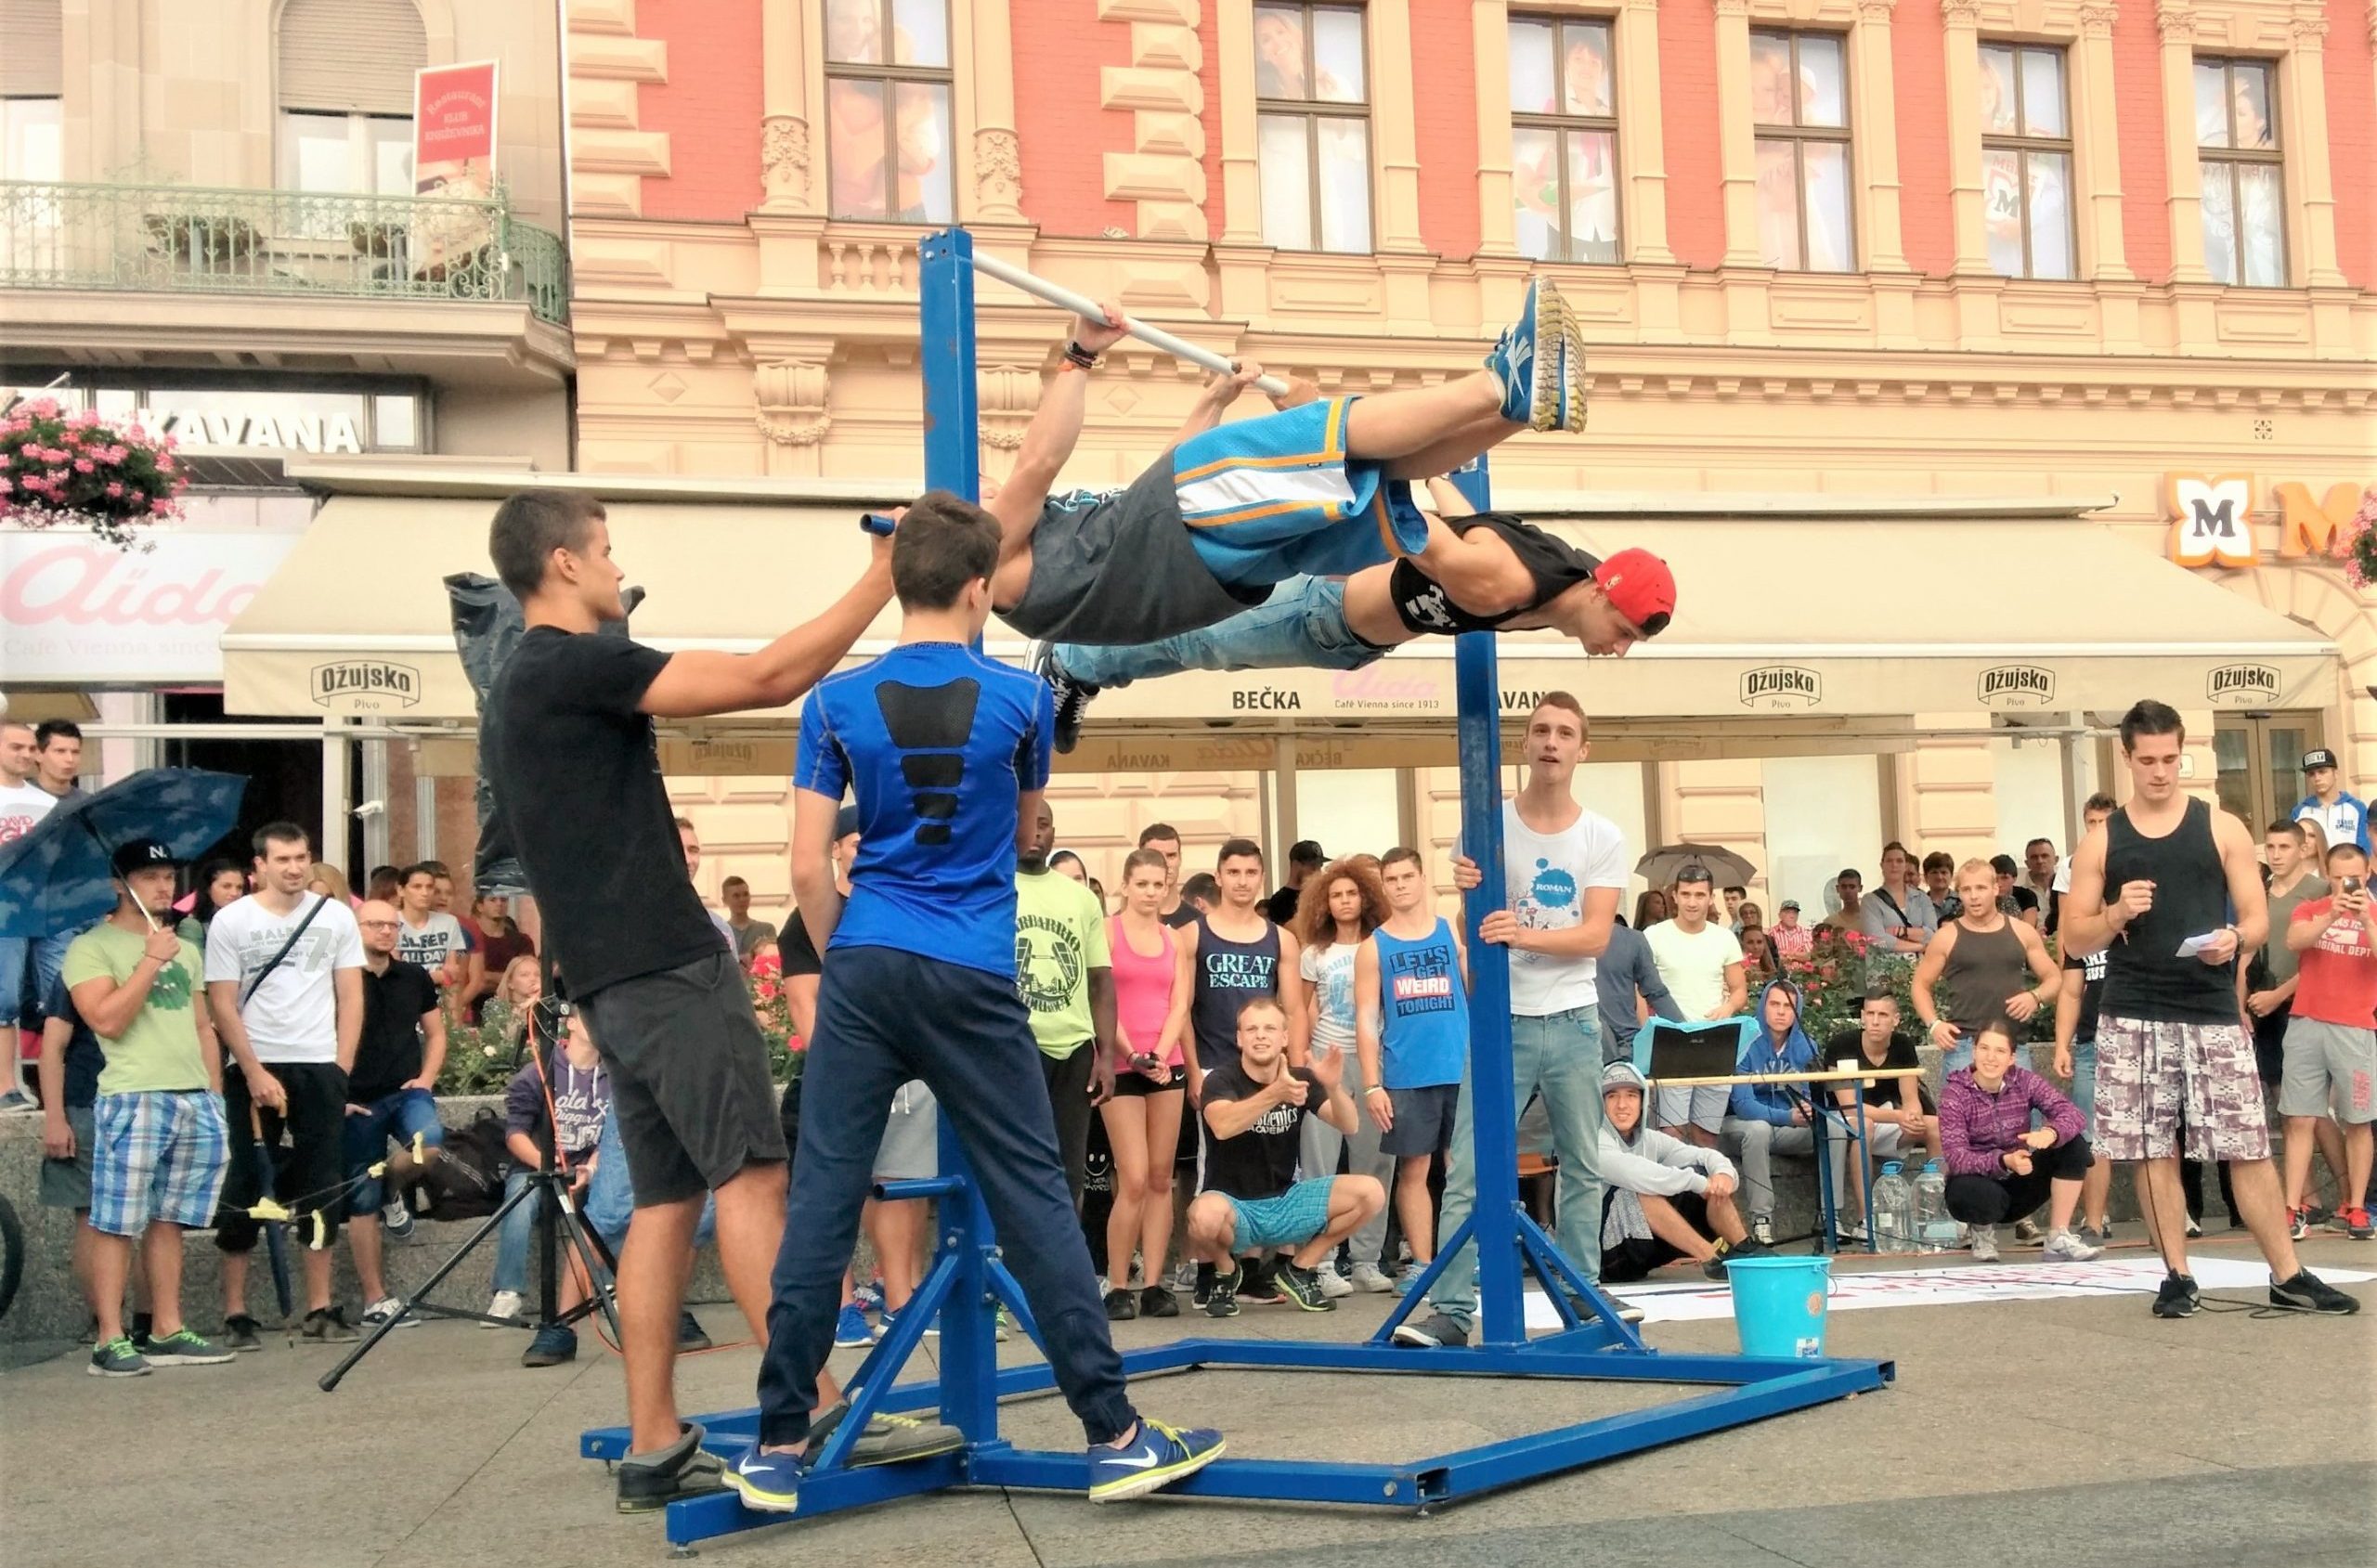 Review on “Street Workout – Connecting Urban Europe, Building Healthy Europe” Youth Exchange